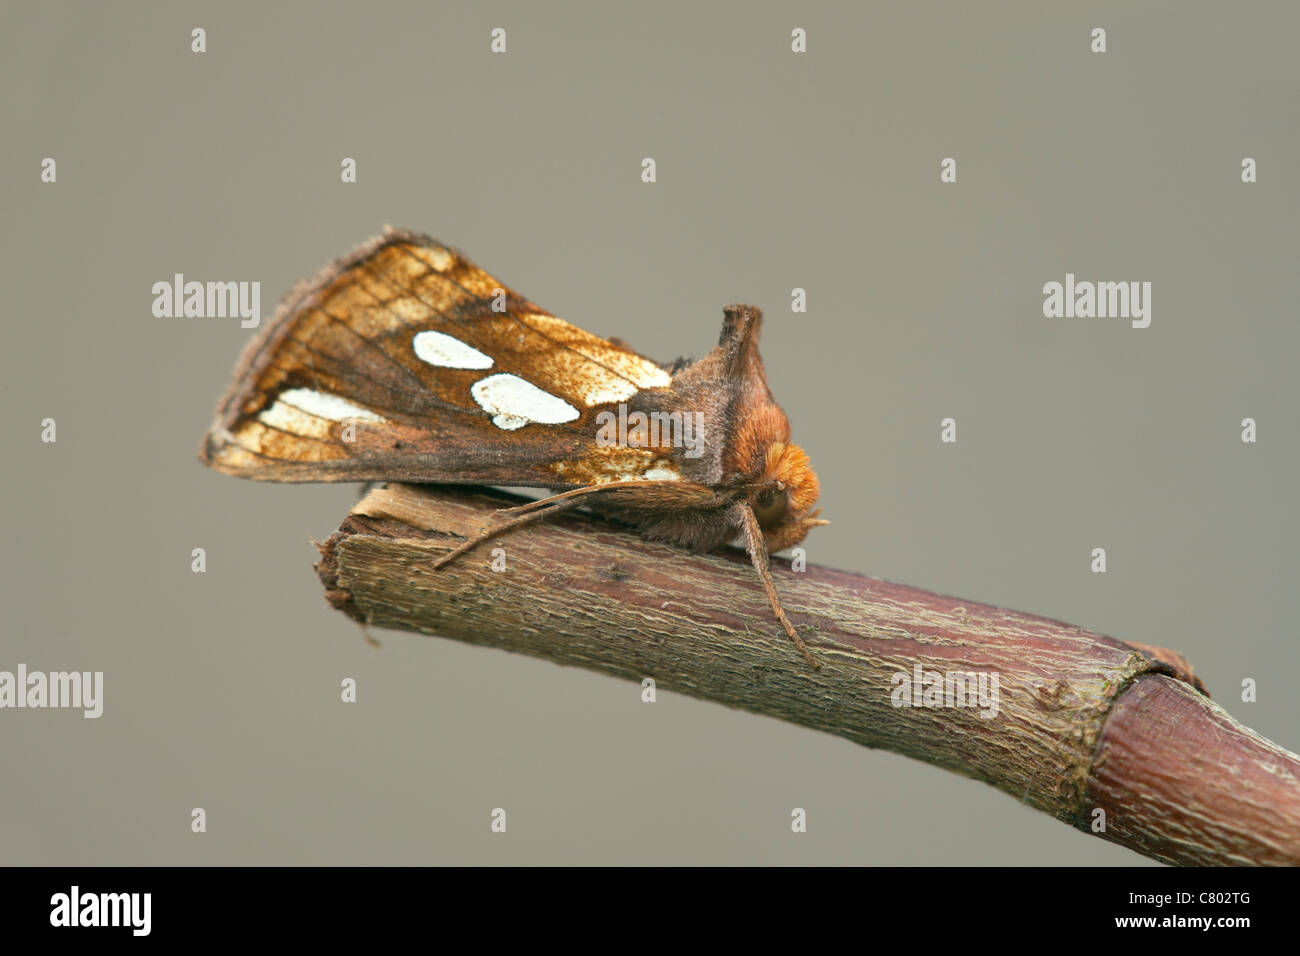 Gold Spot Plusia festucae adult moth at rest on a twig Stock Photo